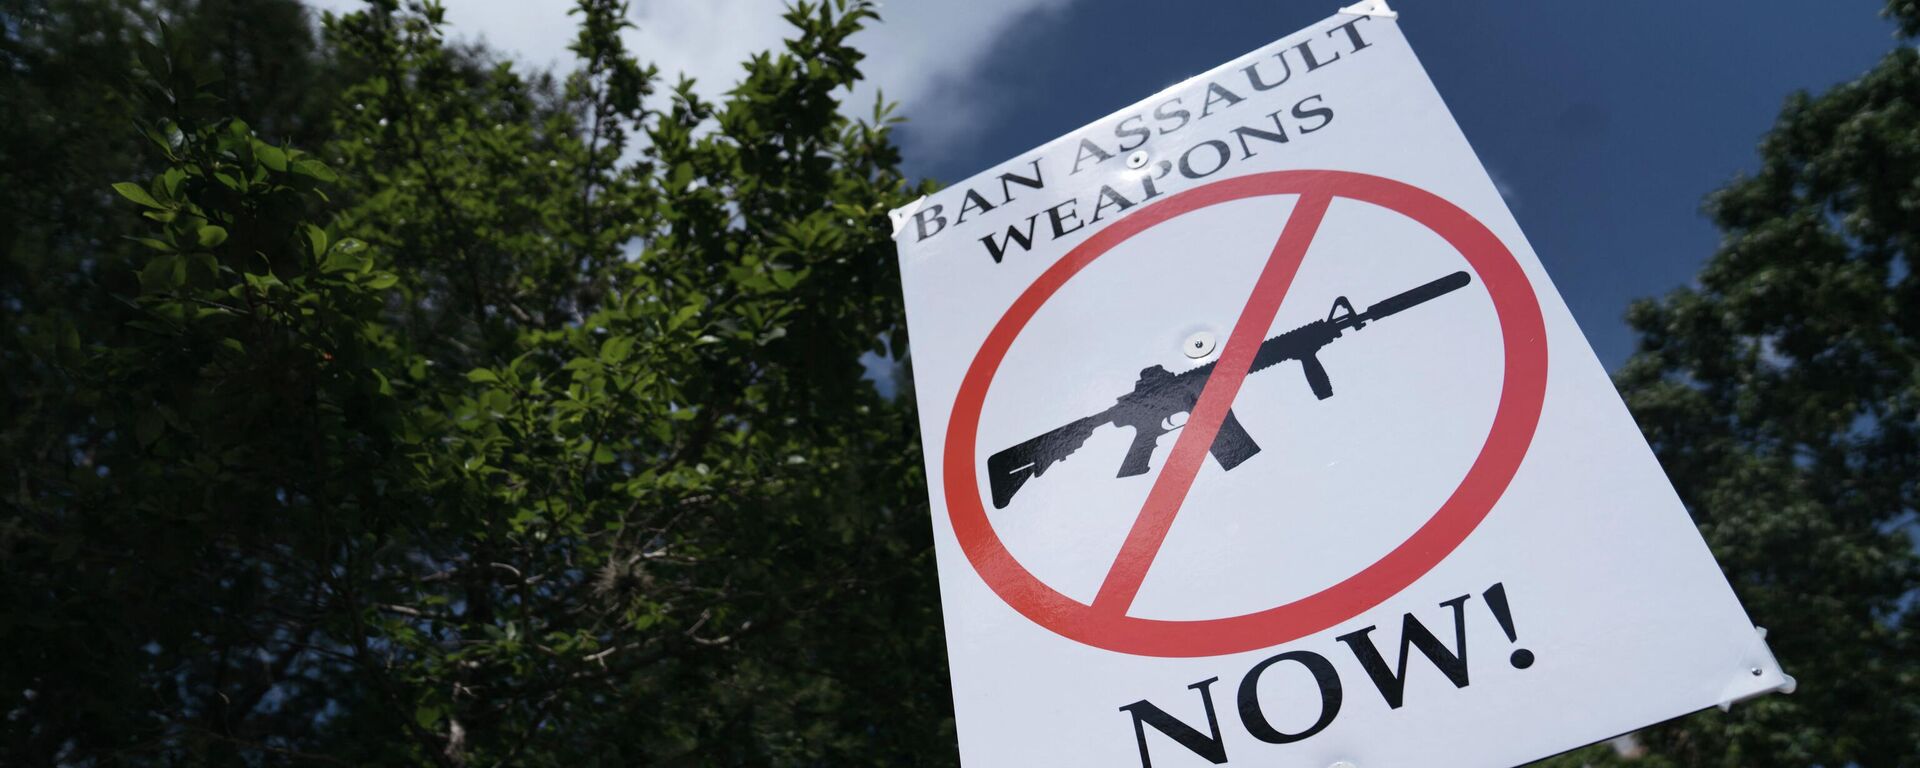 HOUSTON, TX - MAY 27: A gun control advocate holds a sign during a protest across from the National Rifle Association Annual Meeting at the George R. Brown Convention Center, on May 27, 2022 in Houston, Texas.  - Sputnik International, 1920, 07.06.2022